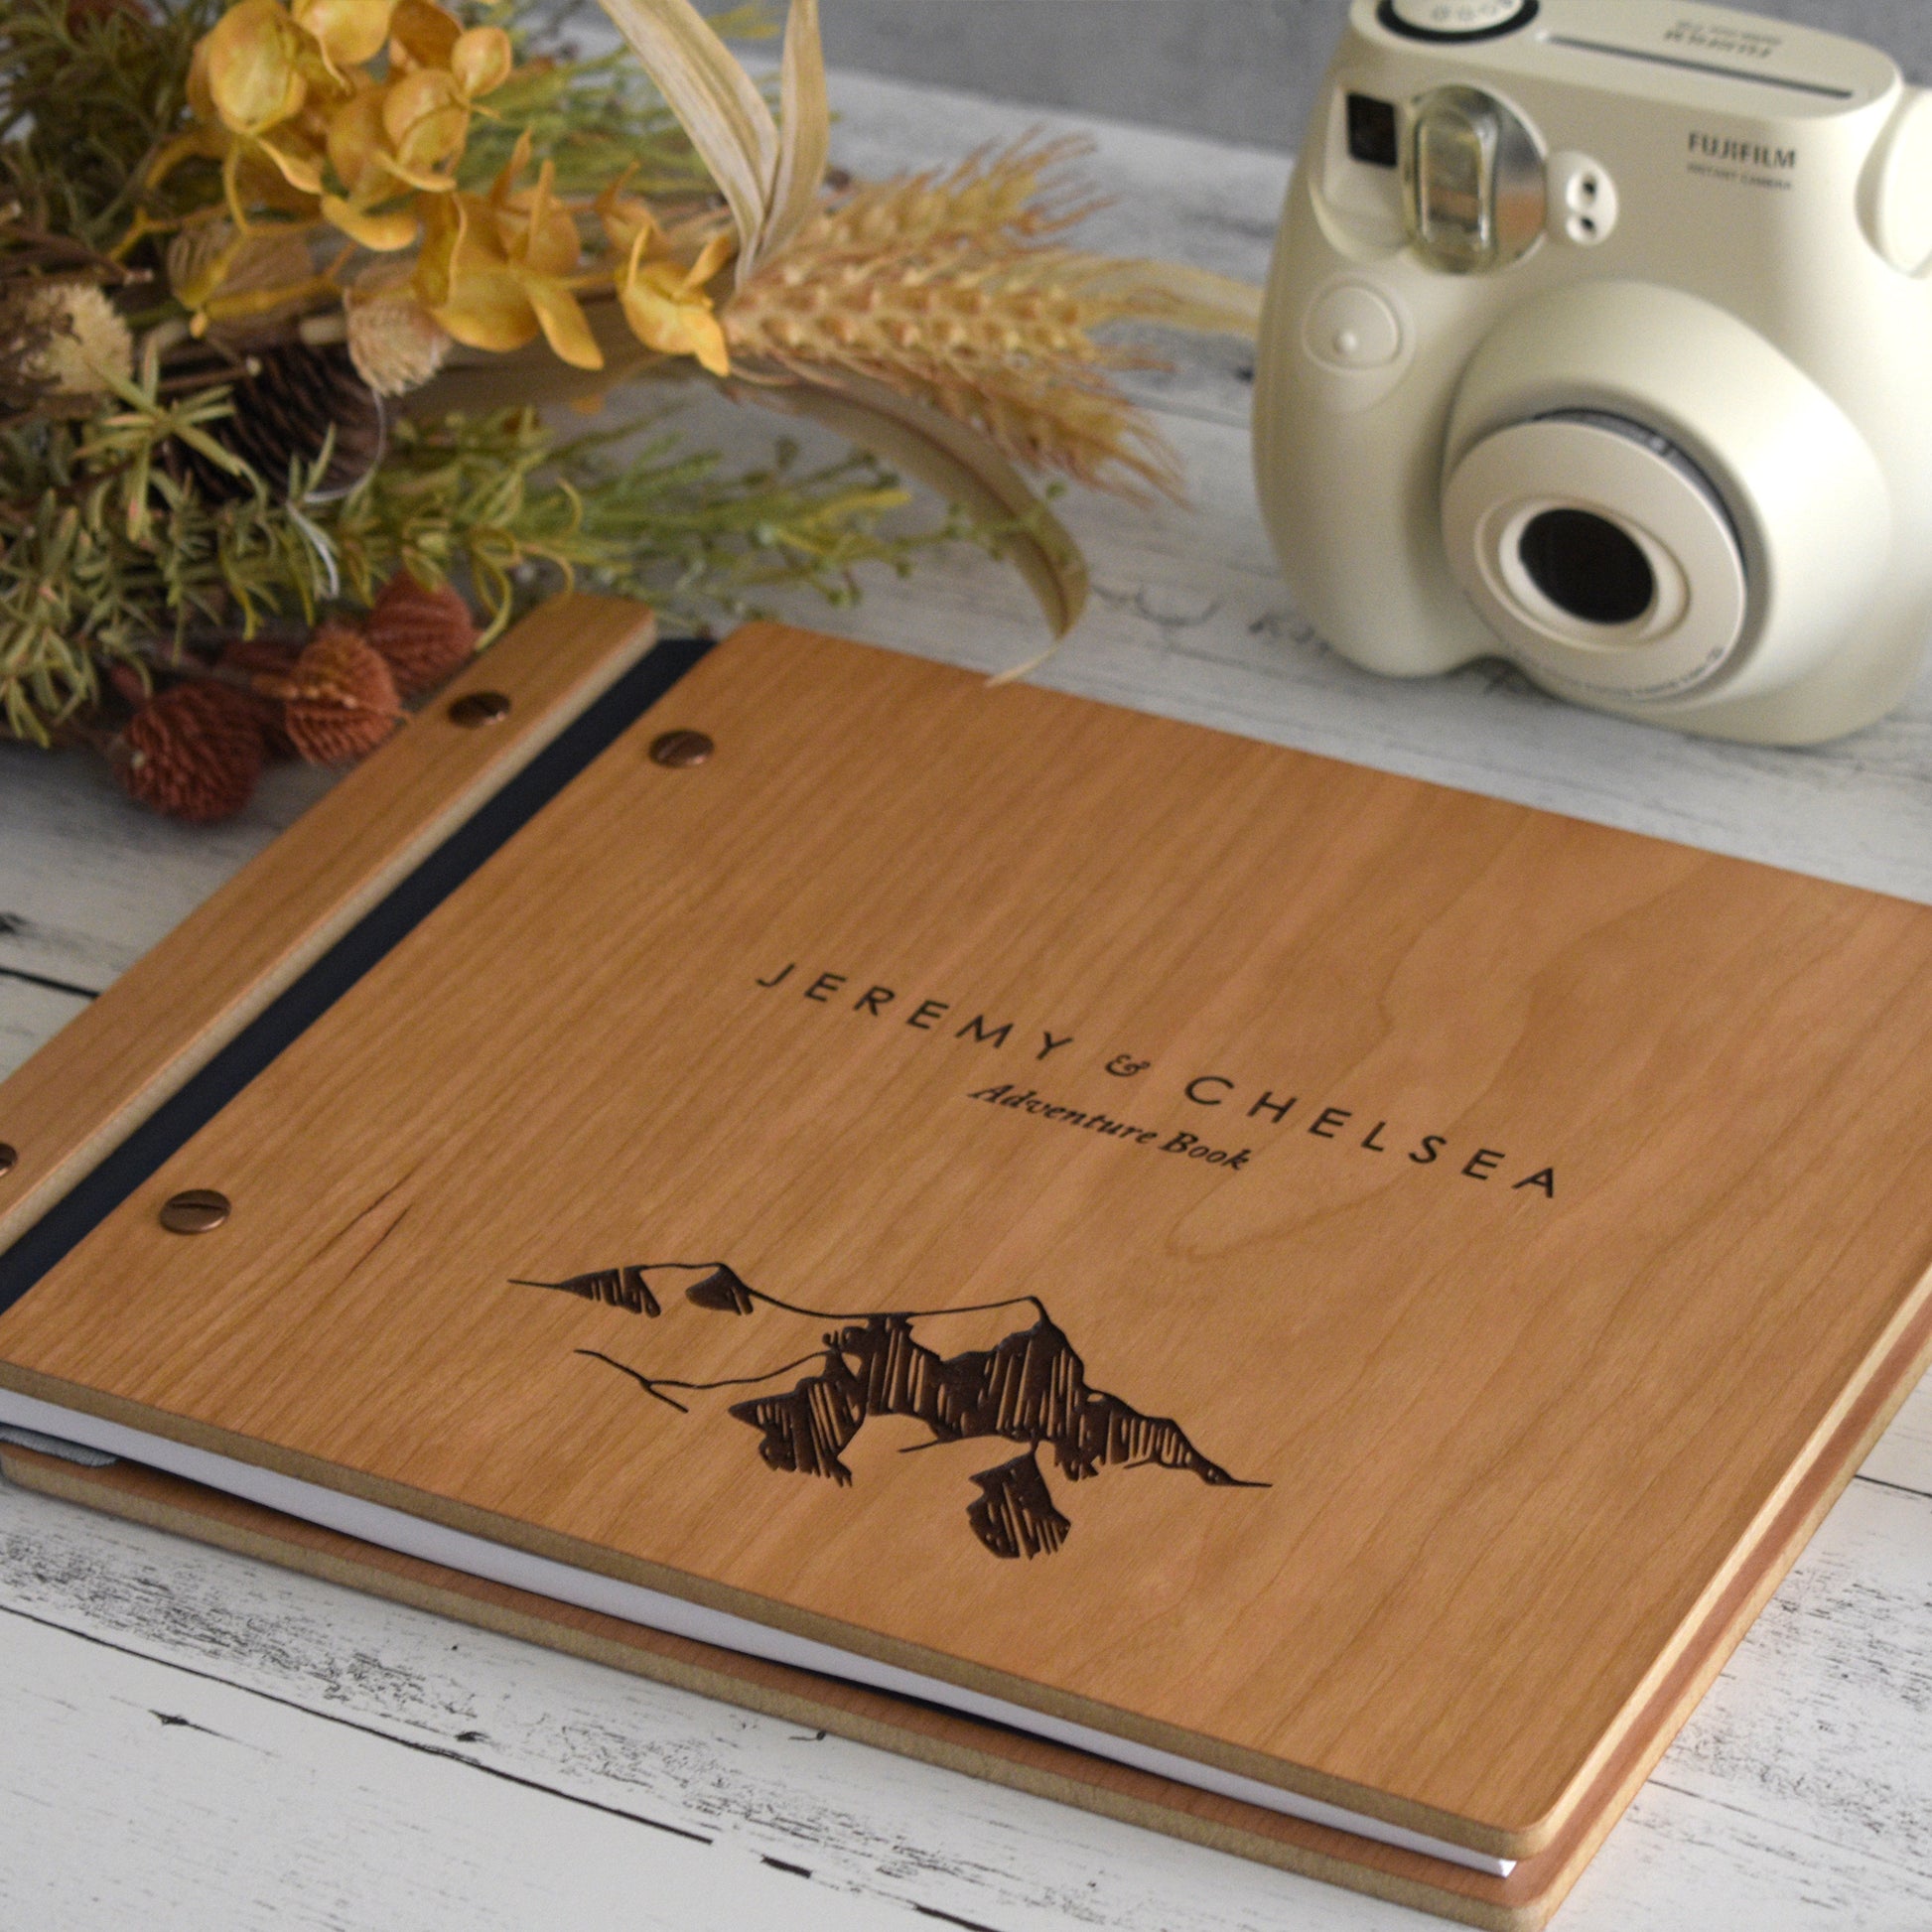 An 8.5x11" guest book lies on a table. Made of cherry wood, black vegan leather binding, and copper hardware. The front cover has an engraved mountain image and reads Jeremy & Chelsea, Adventure Book.